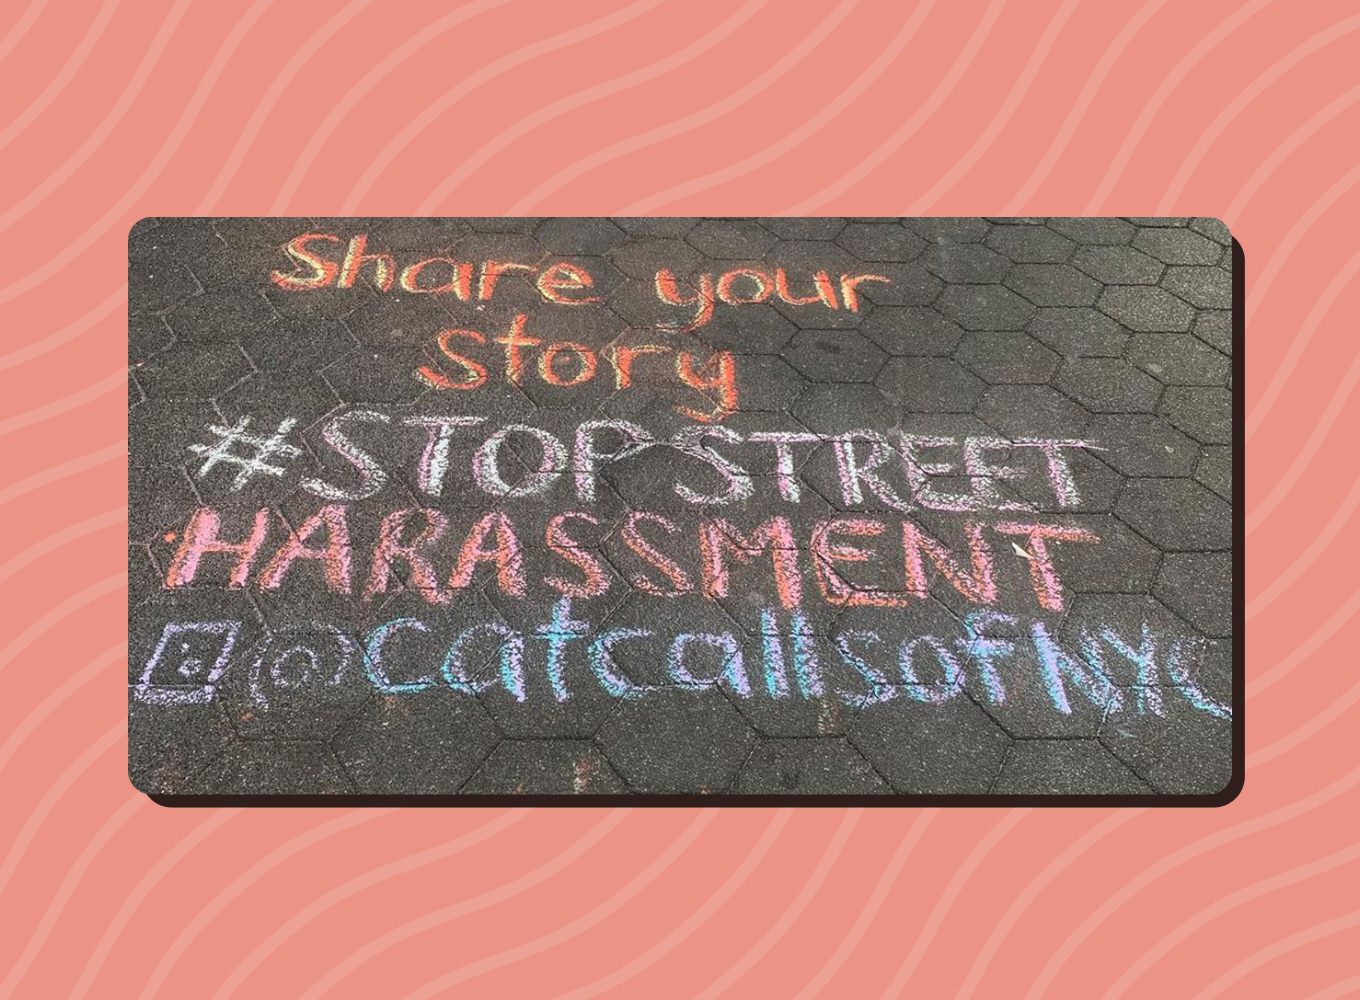 In chalk: Share your story. #StopStreetHarassment. @catcallsofnyc